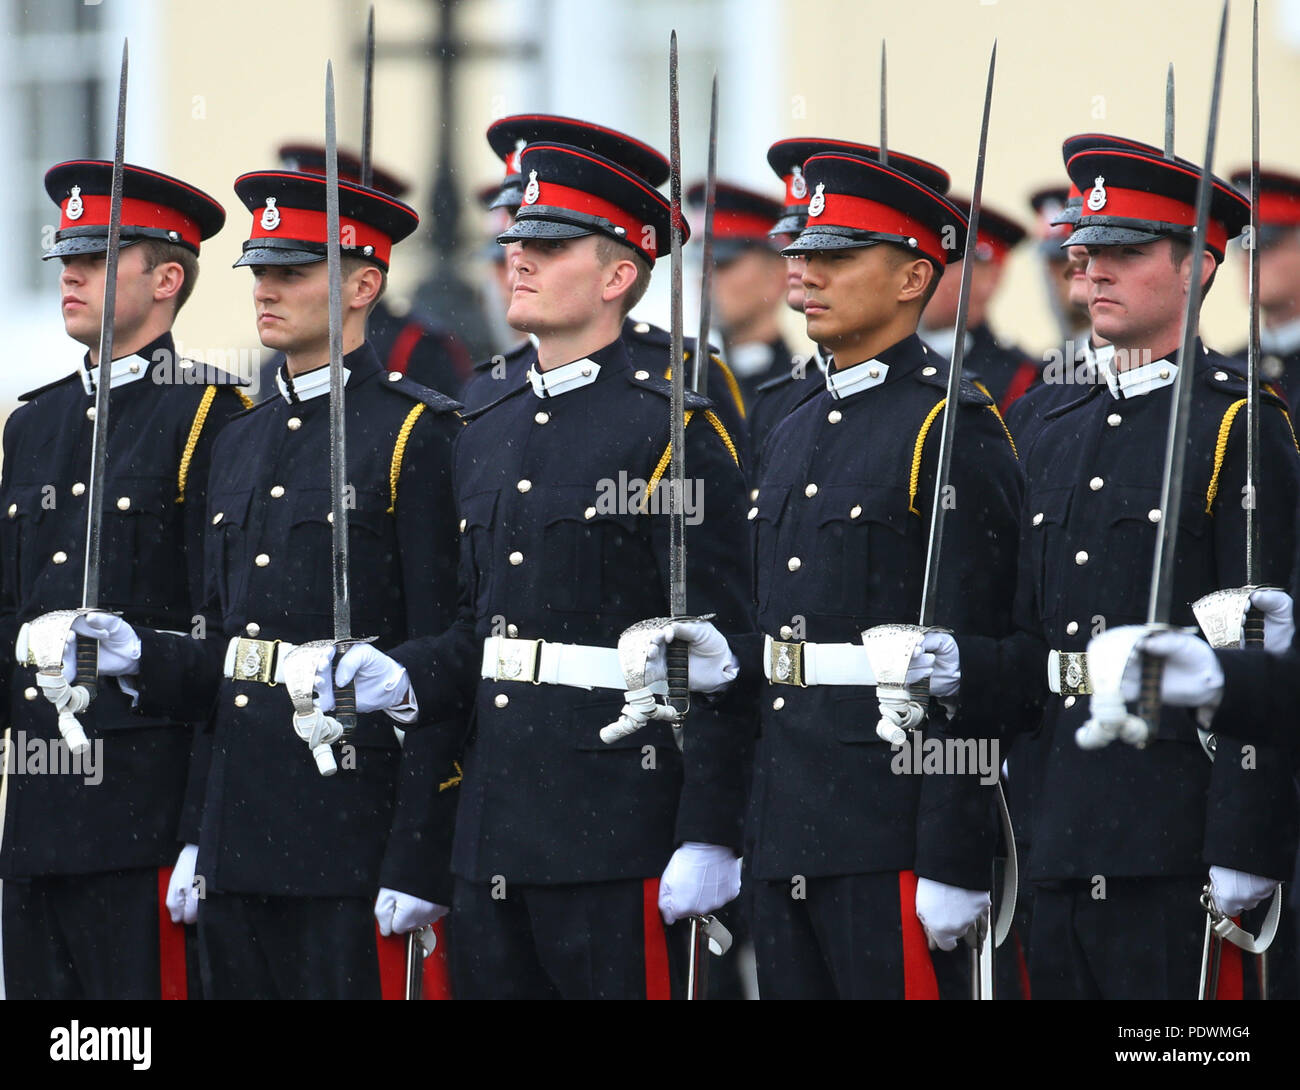 Officer Cadets at the Royal Military Academy in Sandhurst, Berkshire ...